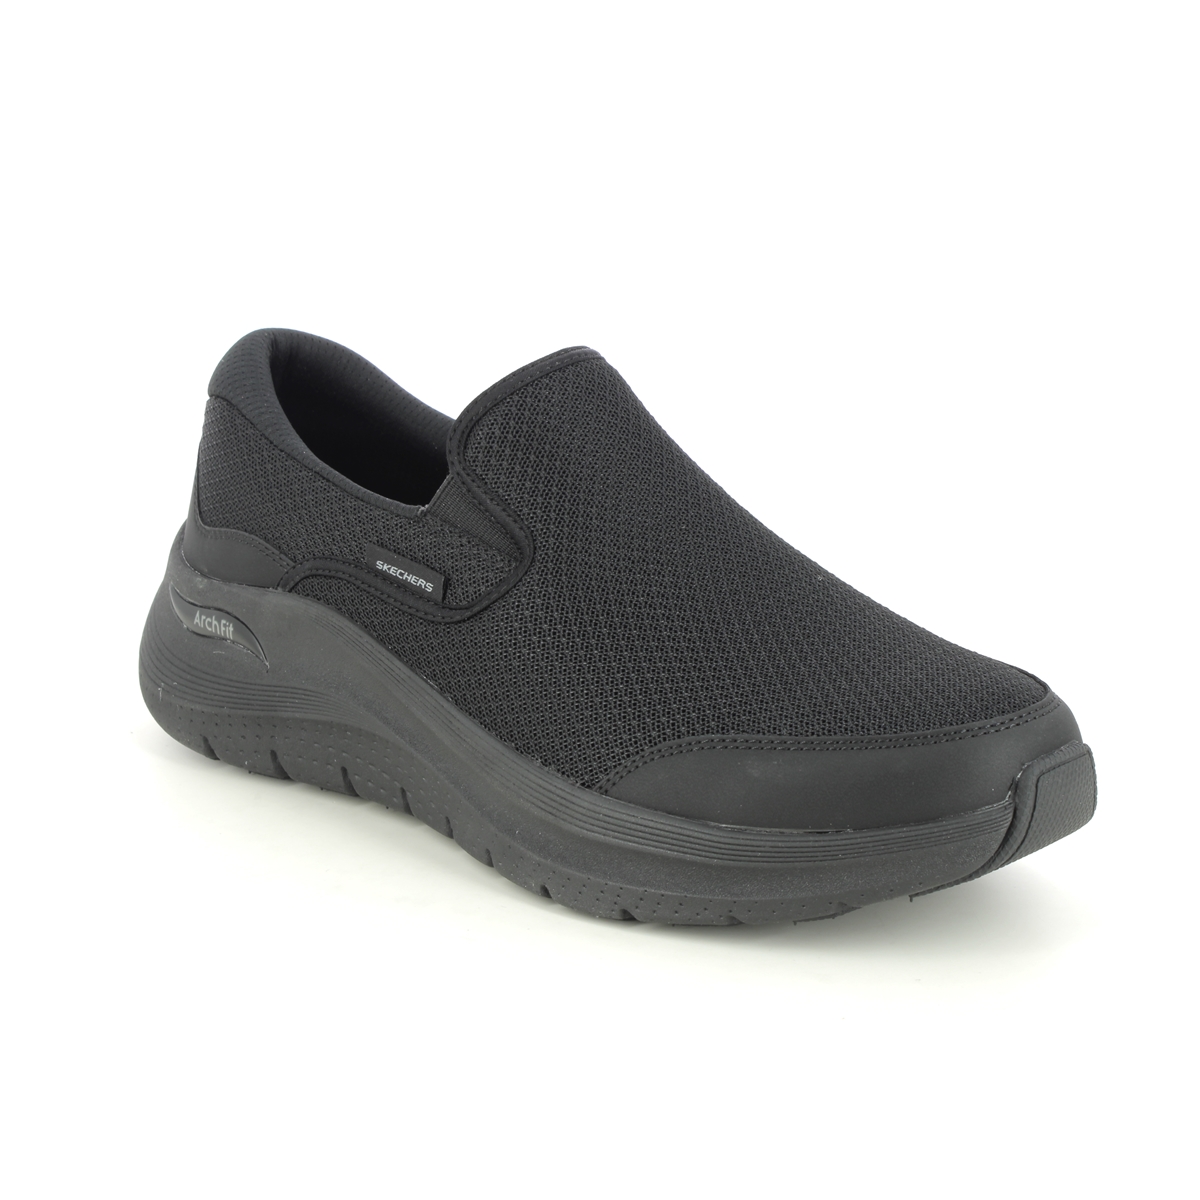 Skechers Arch Fit 2 Slip BBK Black Mens trainers 232706 in a Plain Leather and Textile in Size 8